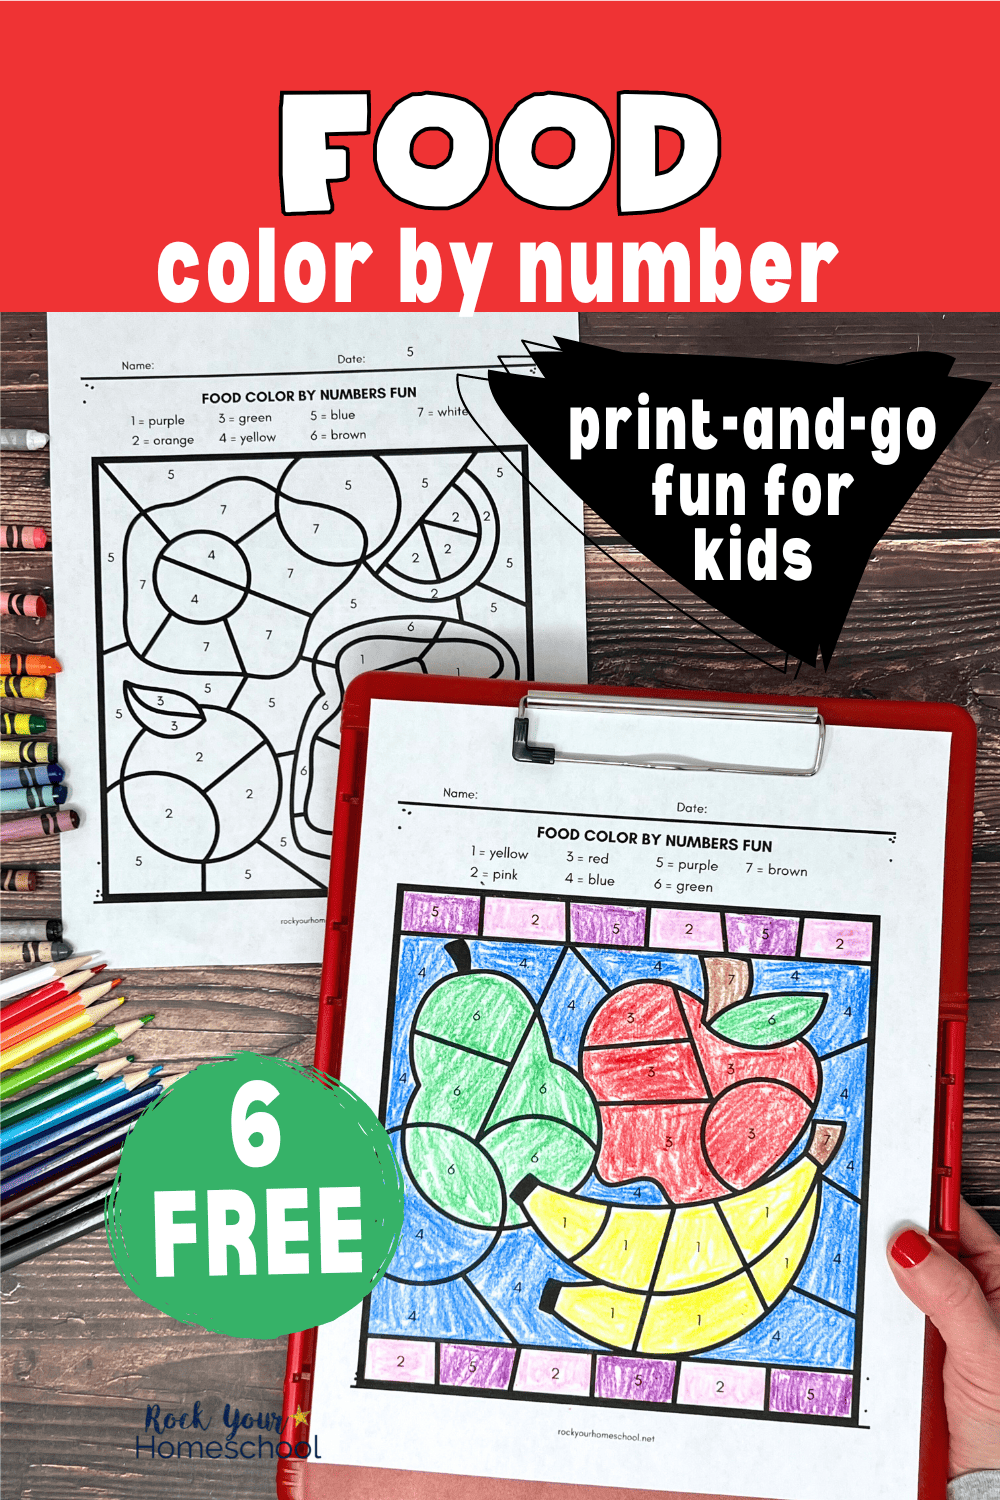 Food Color by Number Worksheets for Fun with Kids (Free)